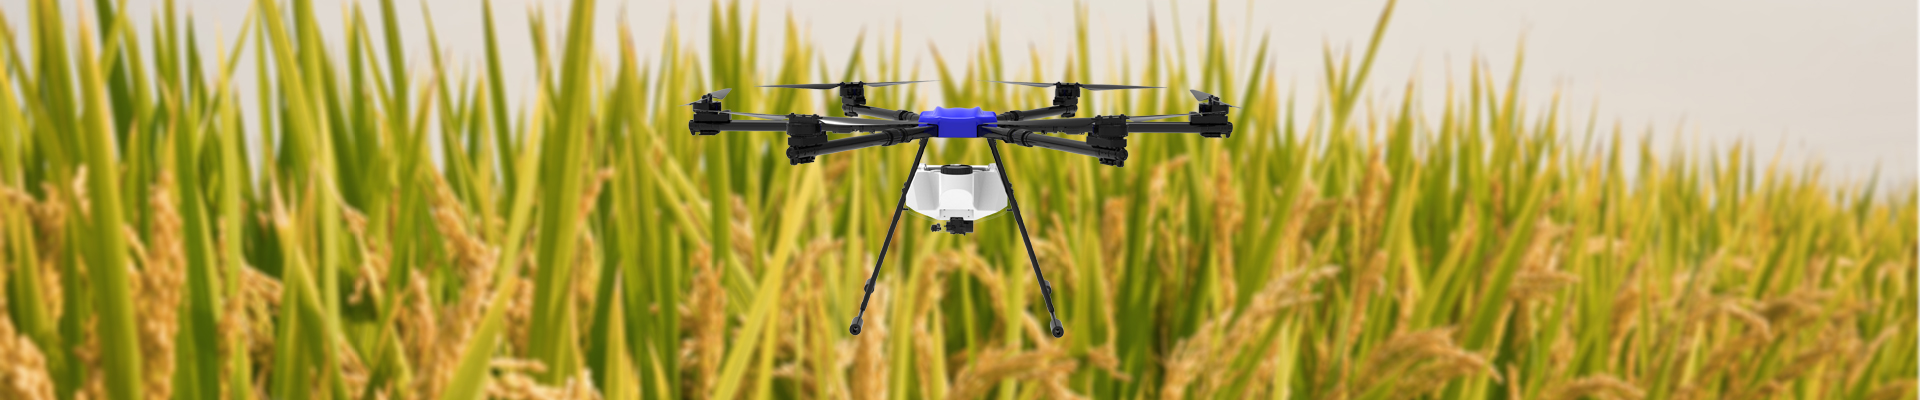  Electricity Agricultural drone，Agricultural machinery